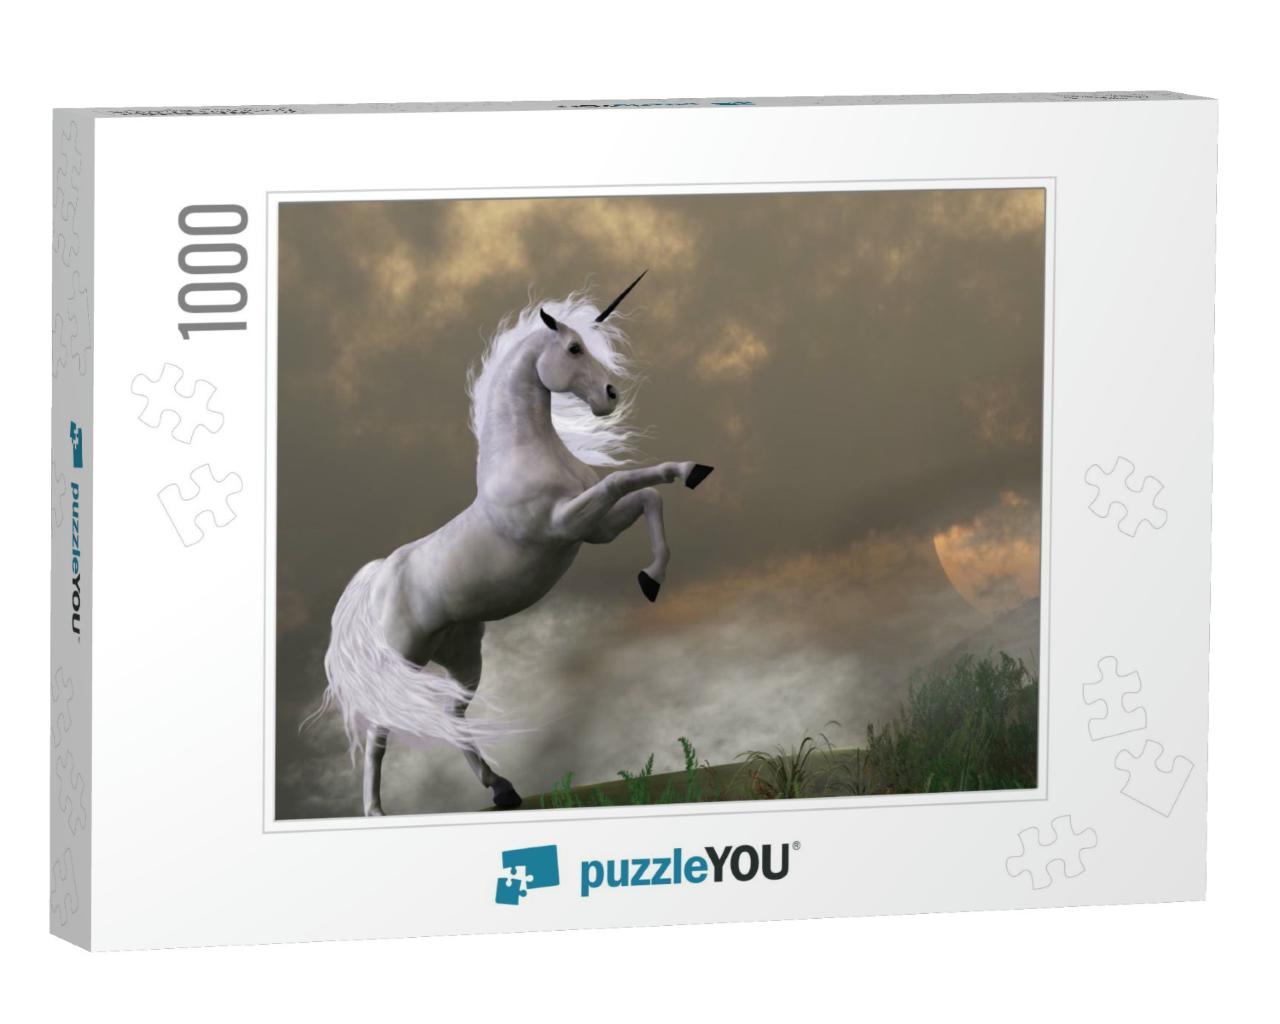 Rare Earth - a Unicorn Stag Asserts Its Power on a Hill S... Jigsaw Puzzle with 1000 pieces